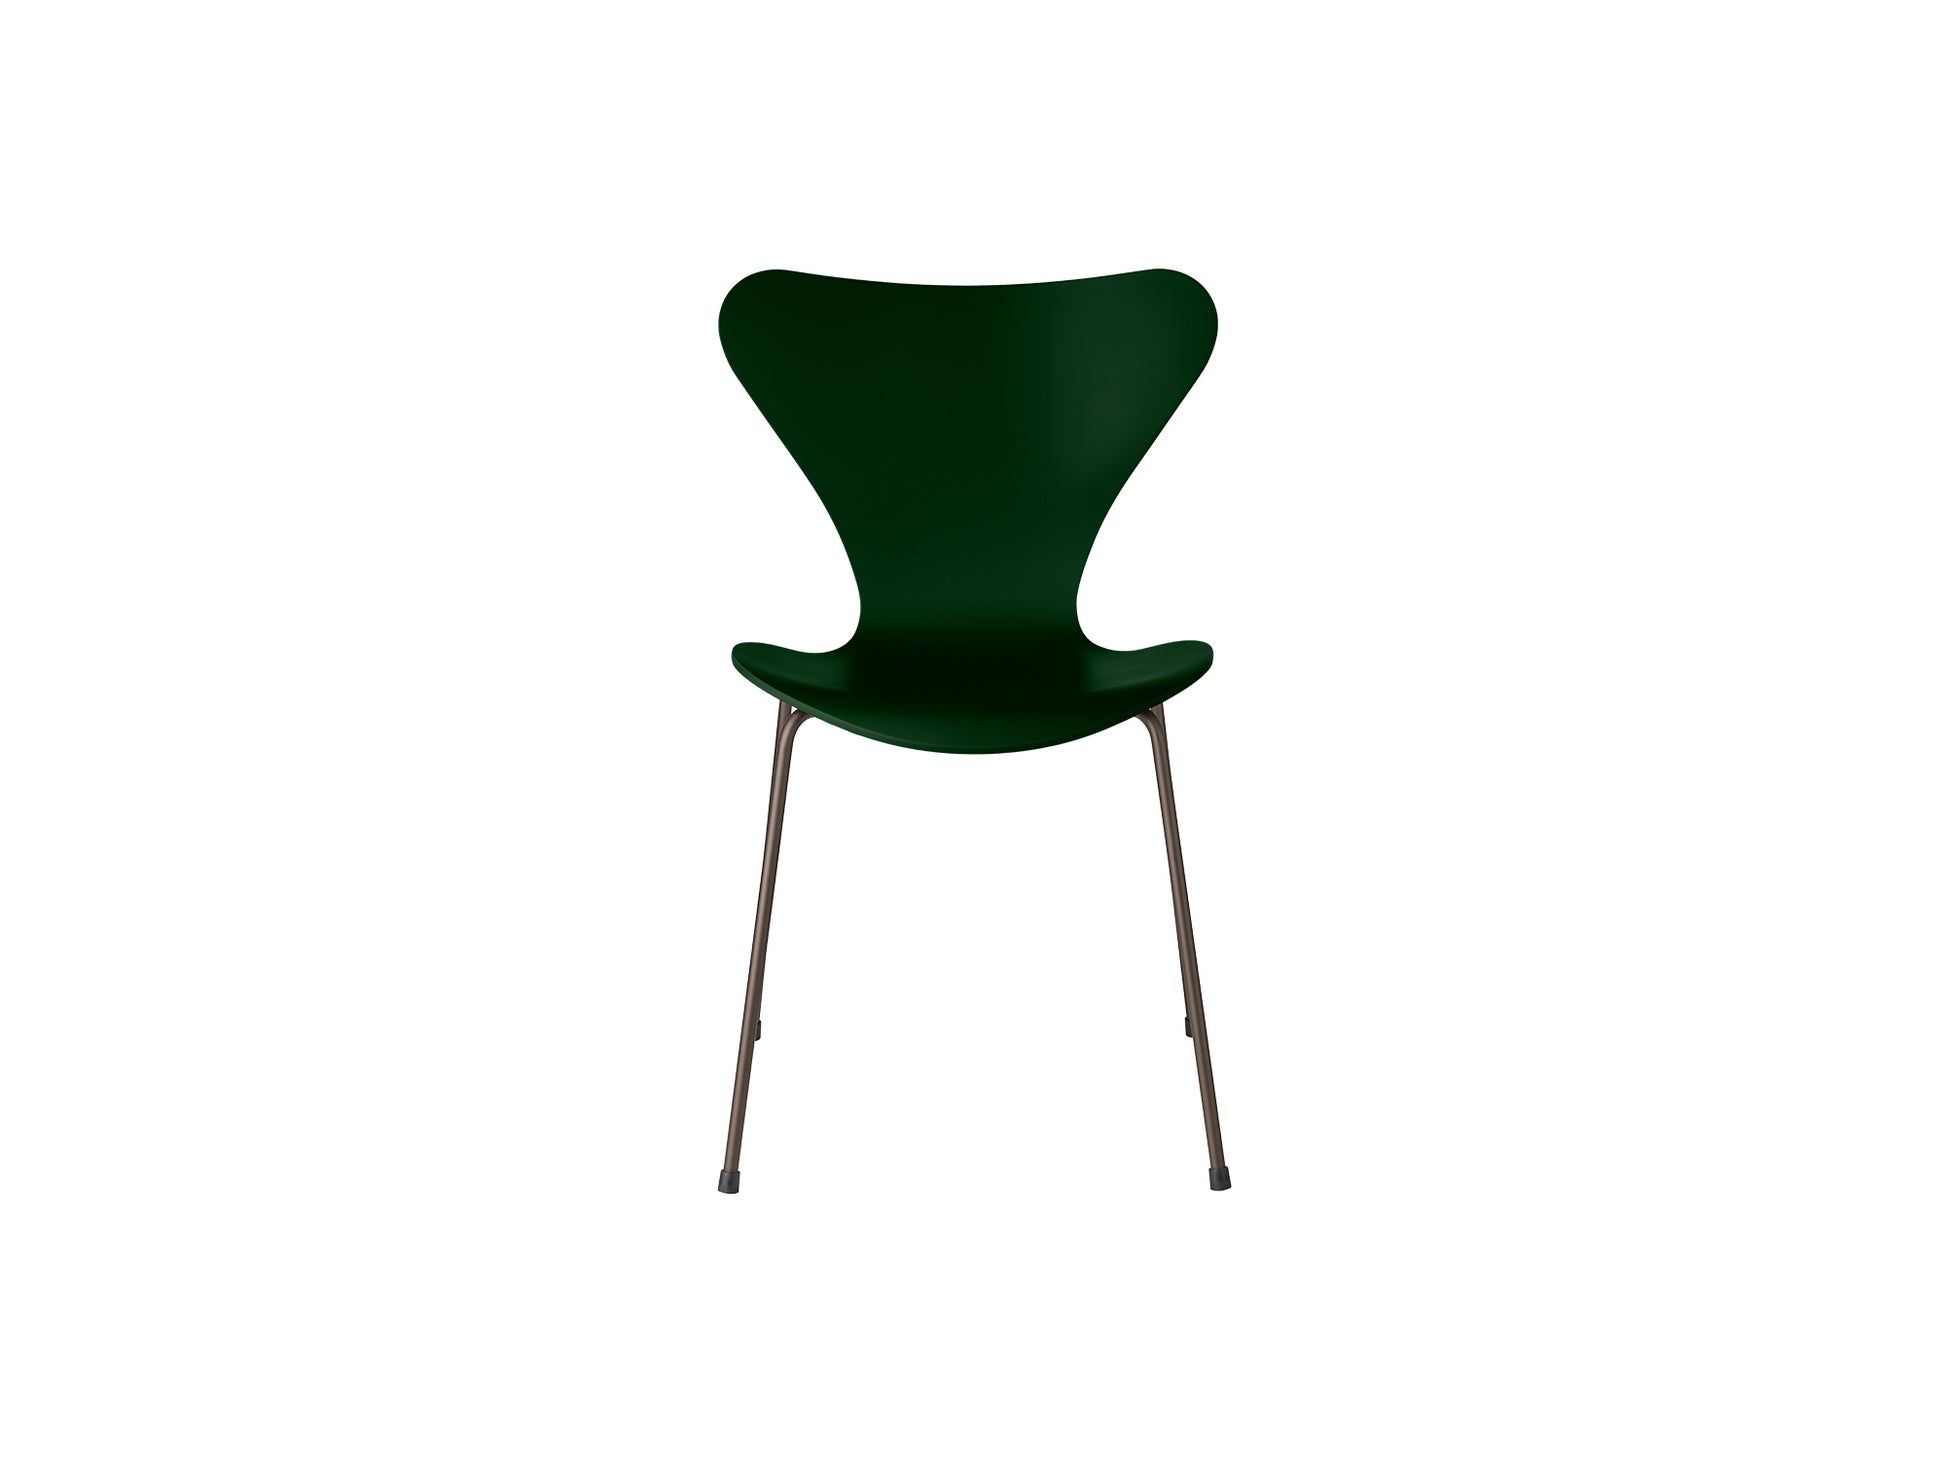 Series 7™ 3107 Dining Chair by Fritz Hansen - Evergreen Lacquered Veneer Shell / Brown Bronze Steel